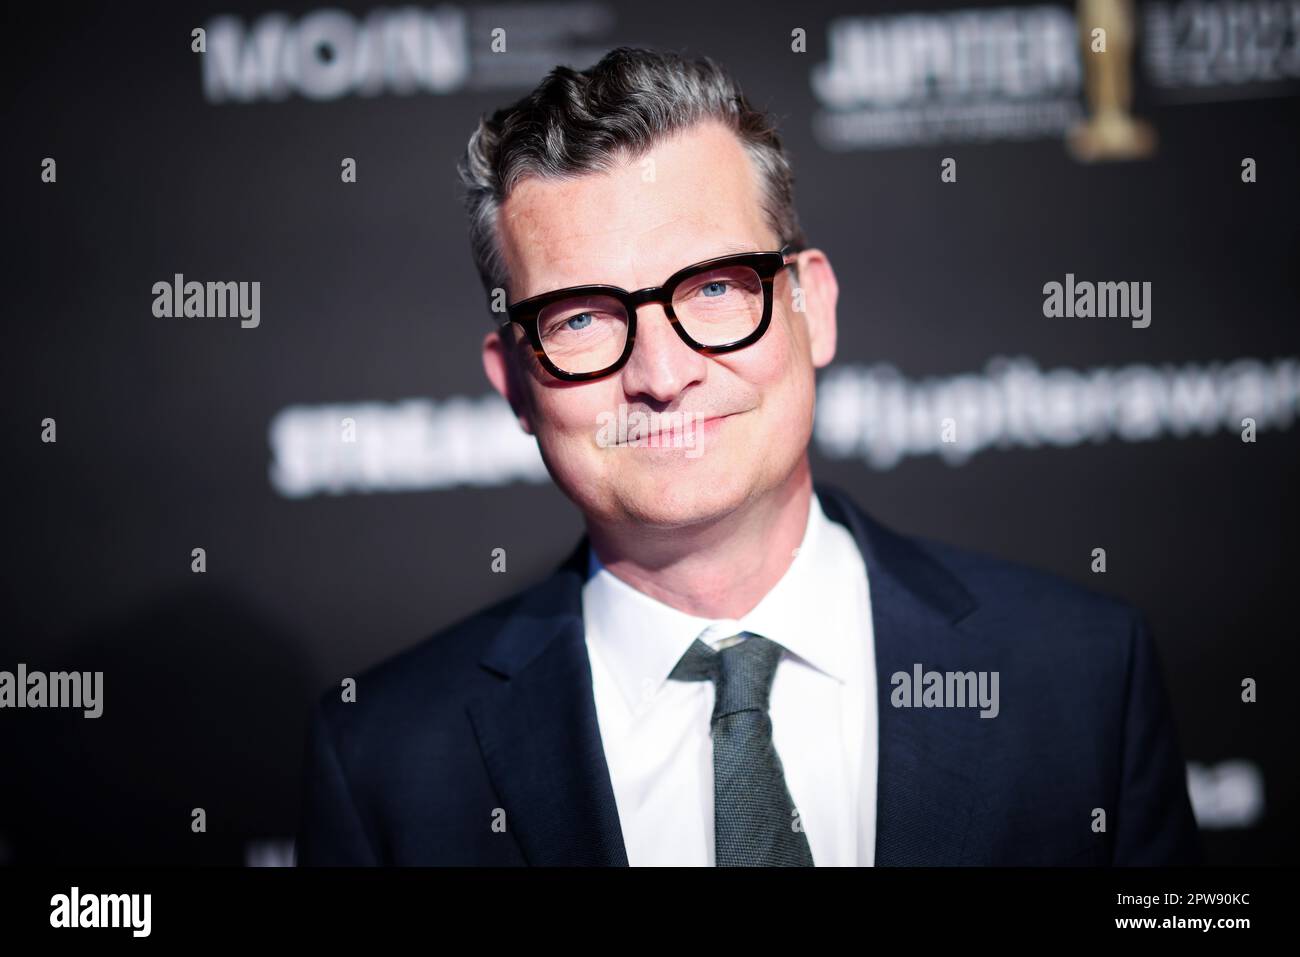 27 April 2023, Hamburg: Malte Grunert, film producer, arrives for the presentation of the Jupiter Award 2023. For the 45th time, the magazines 'TV Spielfilm' and 'Cinema' awarded the audience prize for outstanding film productions and brilliant acting performances. Photo: Christian Charisius/dpa Stock Photo